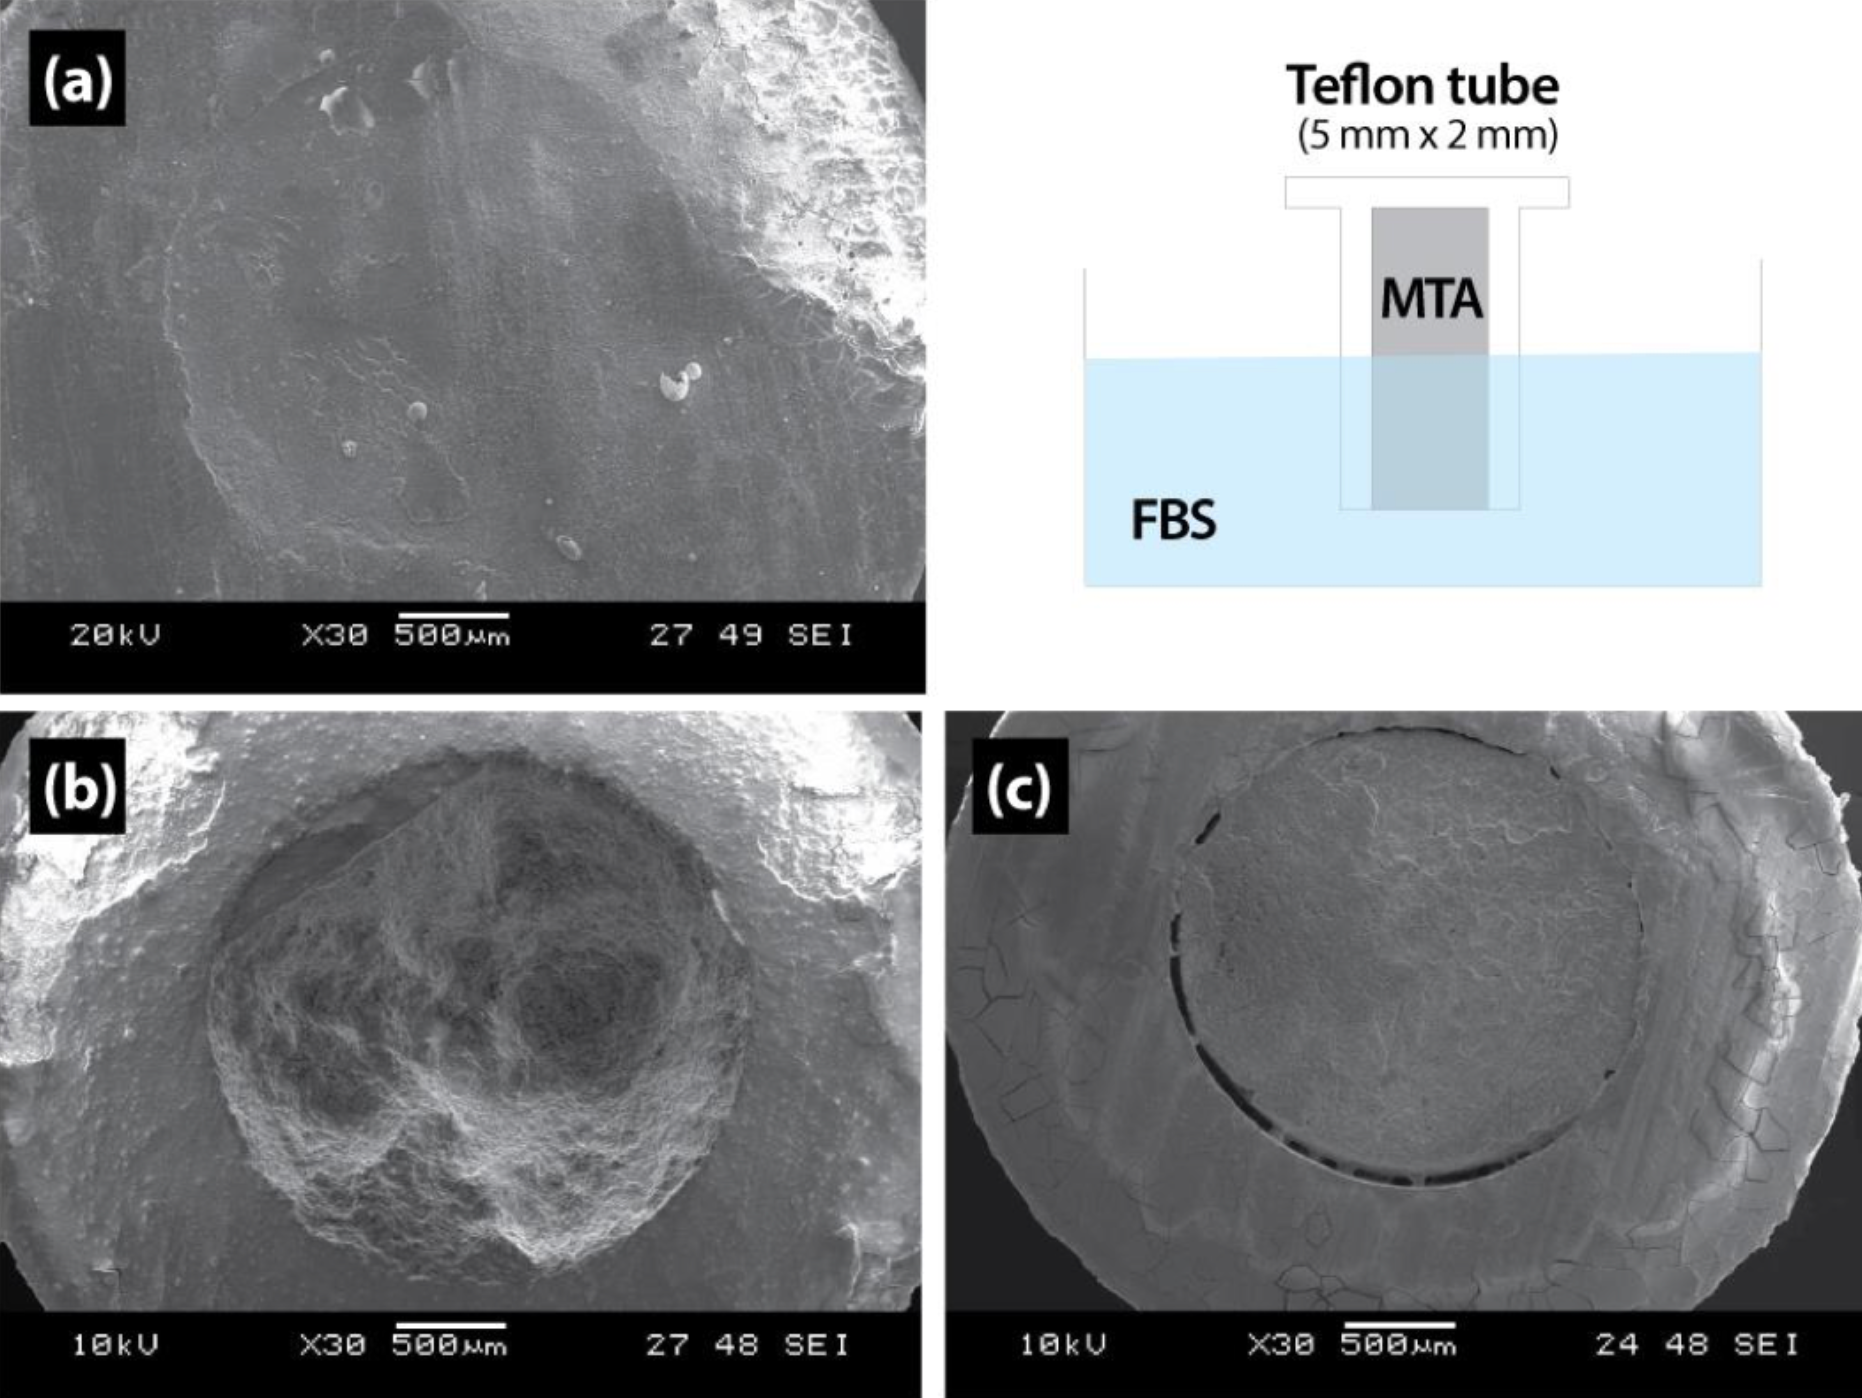 Materials were mixed in accordance with manufacturer’s guidelines and materials were applied in a 5 mm x 2 mm Teflon tube and immersed in FBS (Fetal Bovine Solution). After 24 hours, samples were removed, washed, and observed under SEM. (a) Endocem MTA (b) Proroot MTA (c) IRM